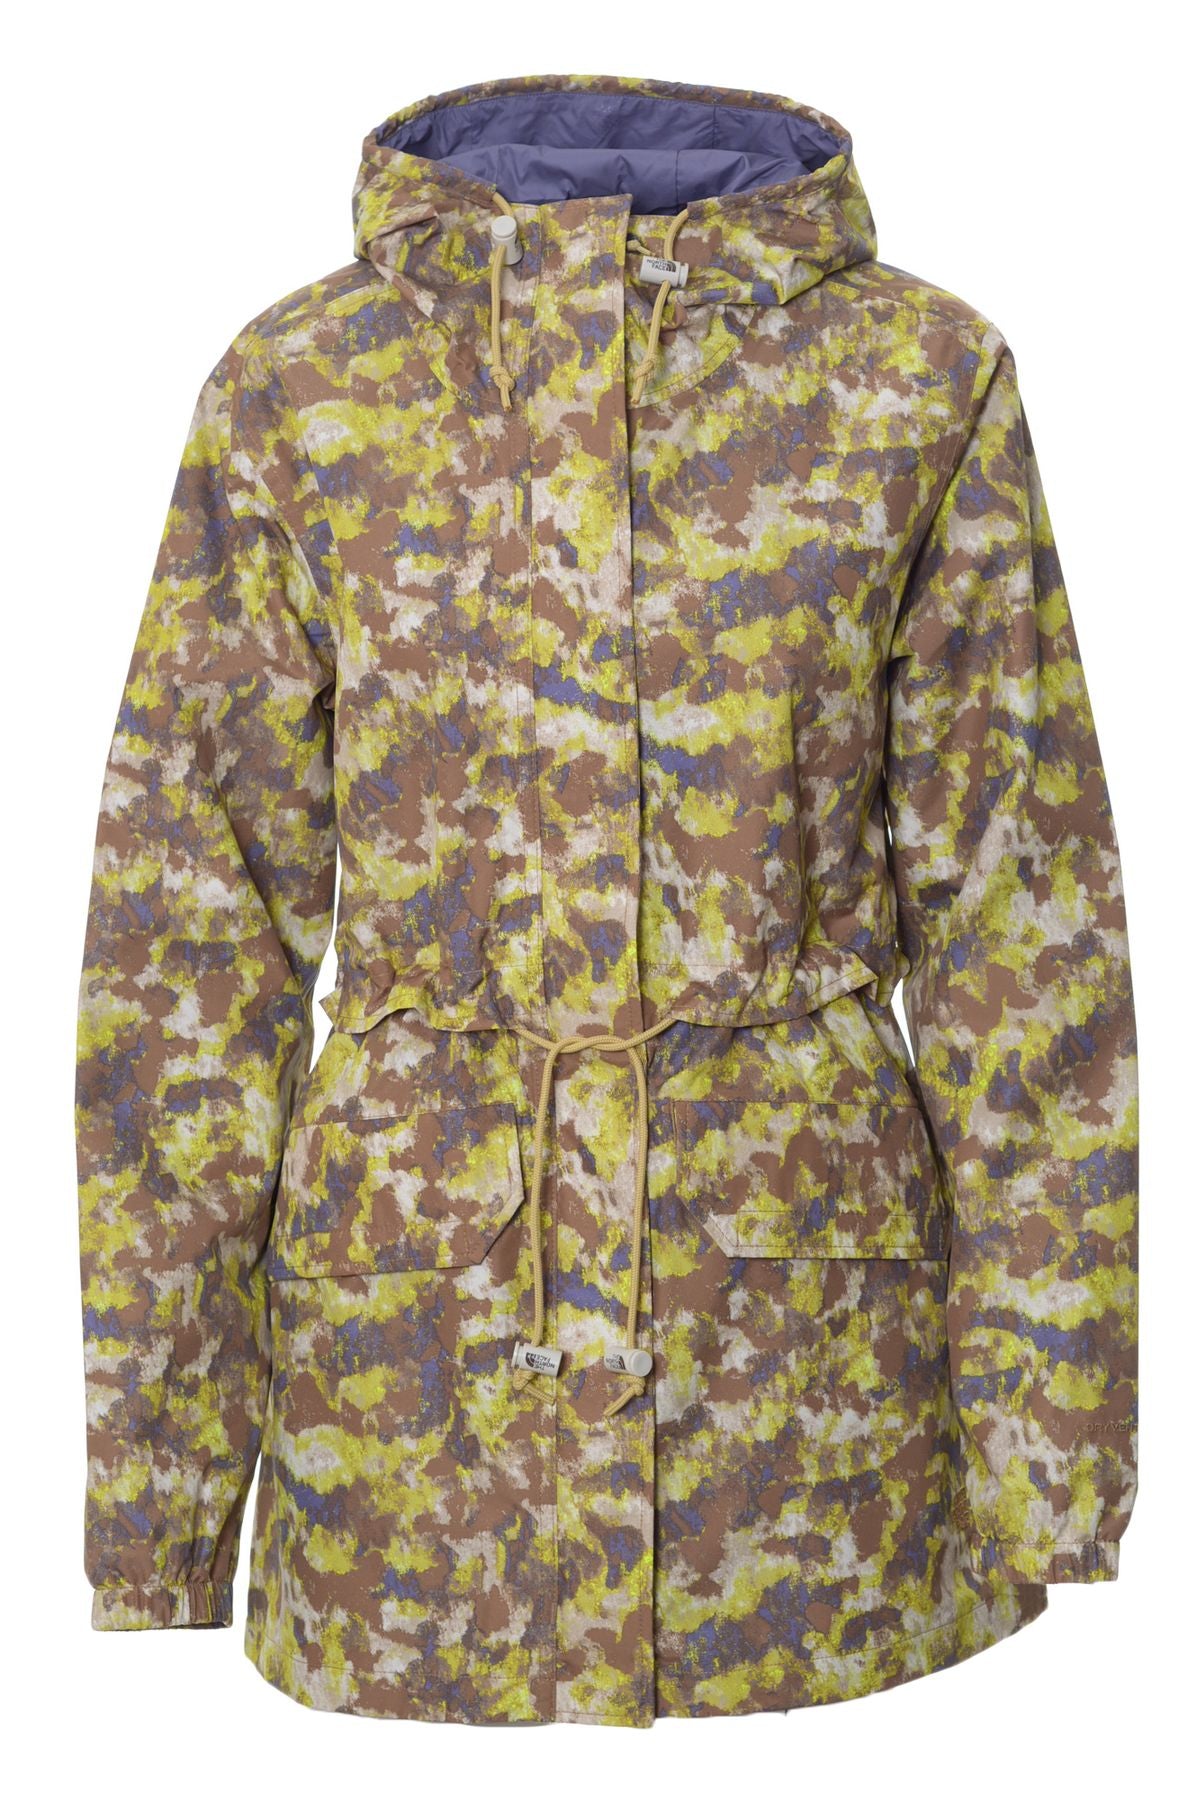 THE NORTH FACE Spring/Summer Polyester Jackets